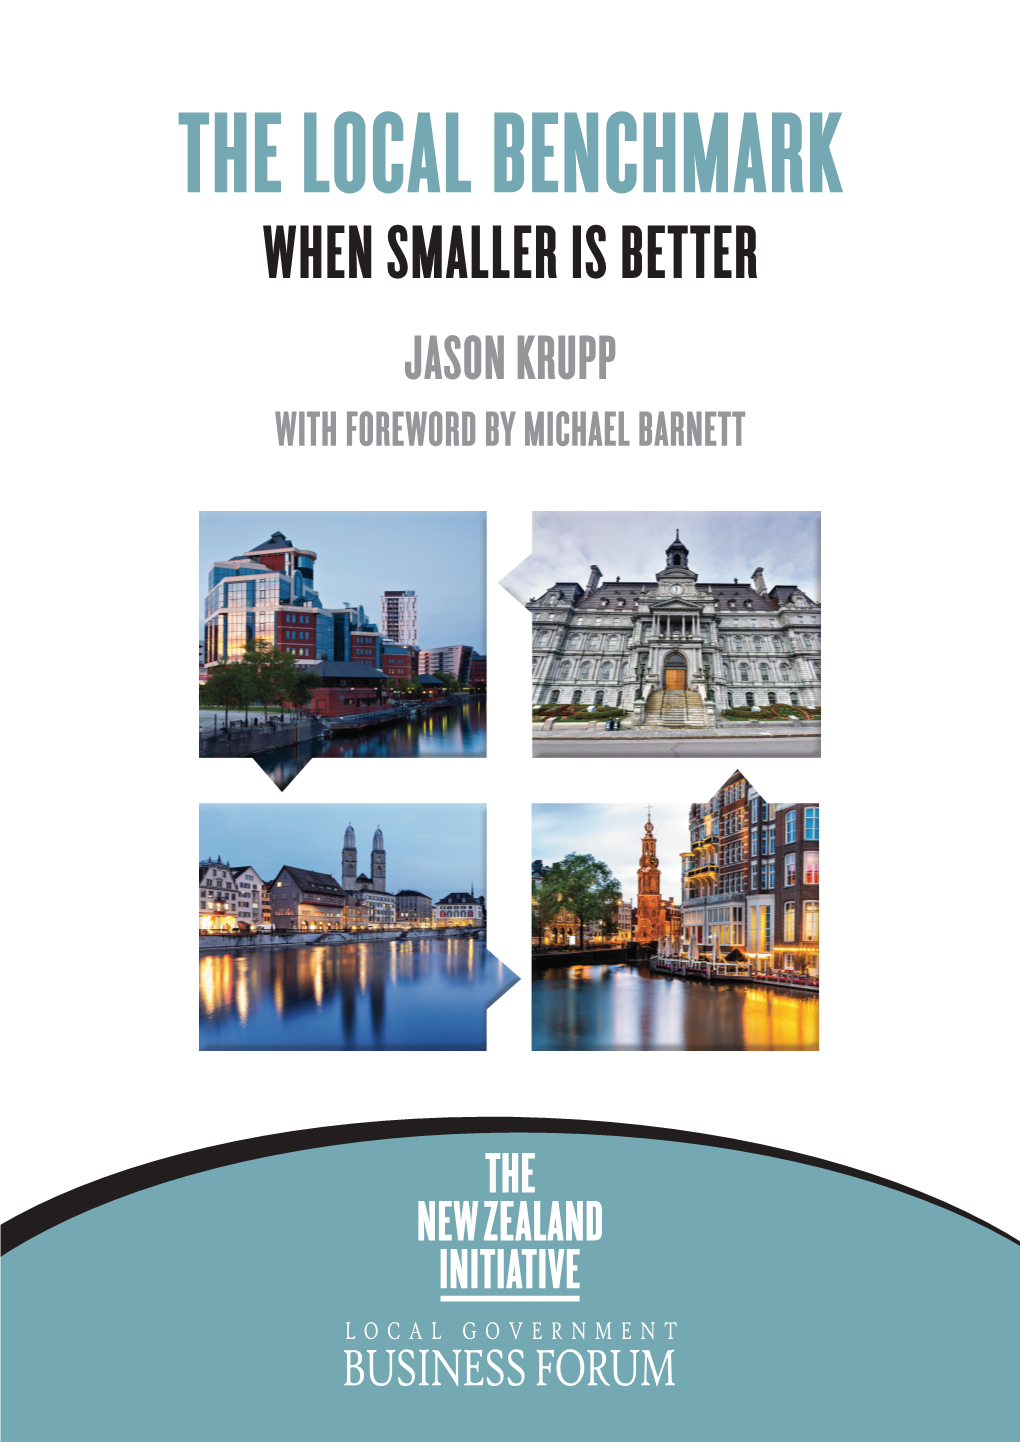 WHEN SMALLER IS BETTER JASON KRUPP with FOREWORD by MICHAEL BARNETT © the New Zealand Initiative 2016